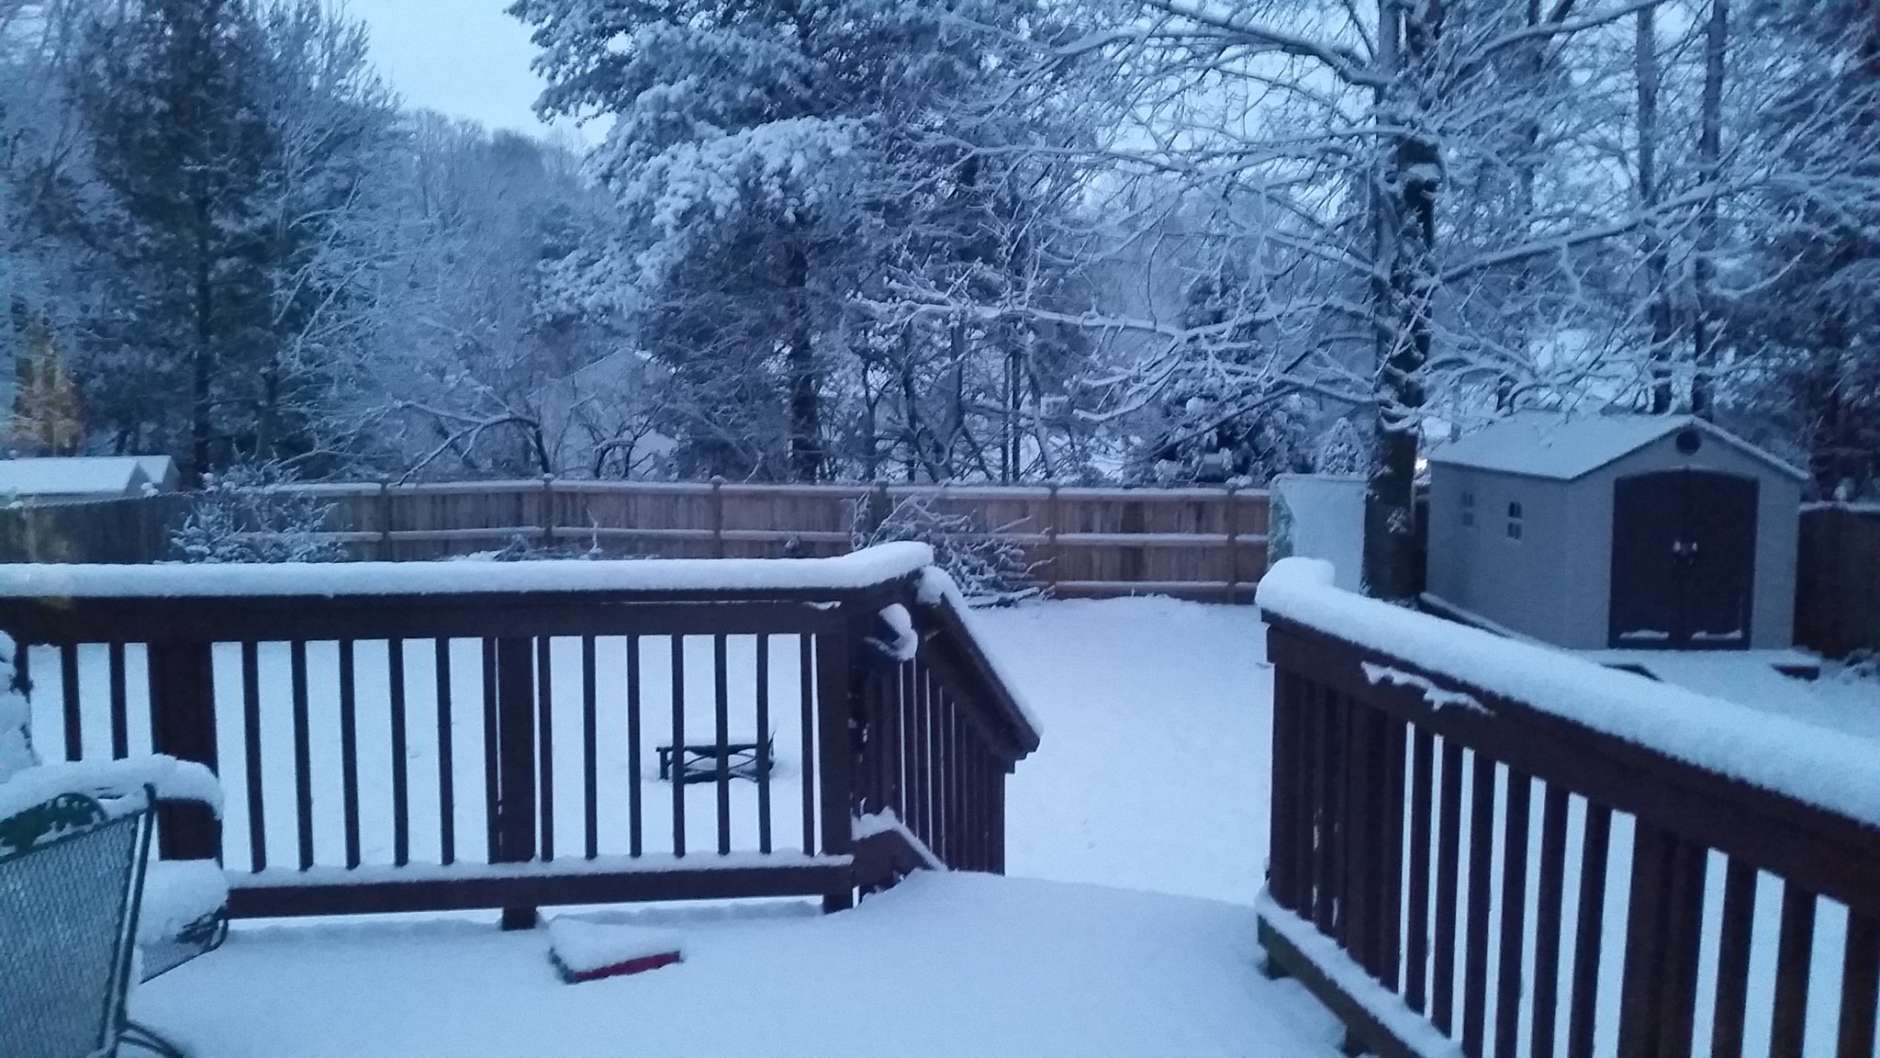 FILE - Winter wonderland in Woodbridge, but not quite a snow day — Prince William County public schools were already closed because of teacher work day, says WTOP's Kathy Stewart. (WTOP/Kathy Stewart)